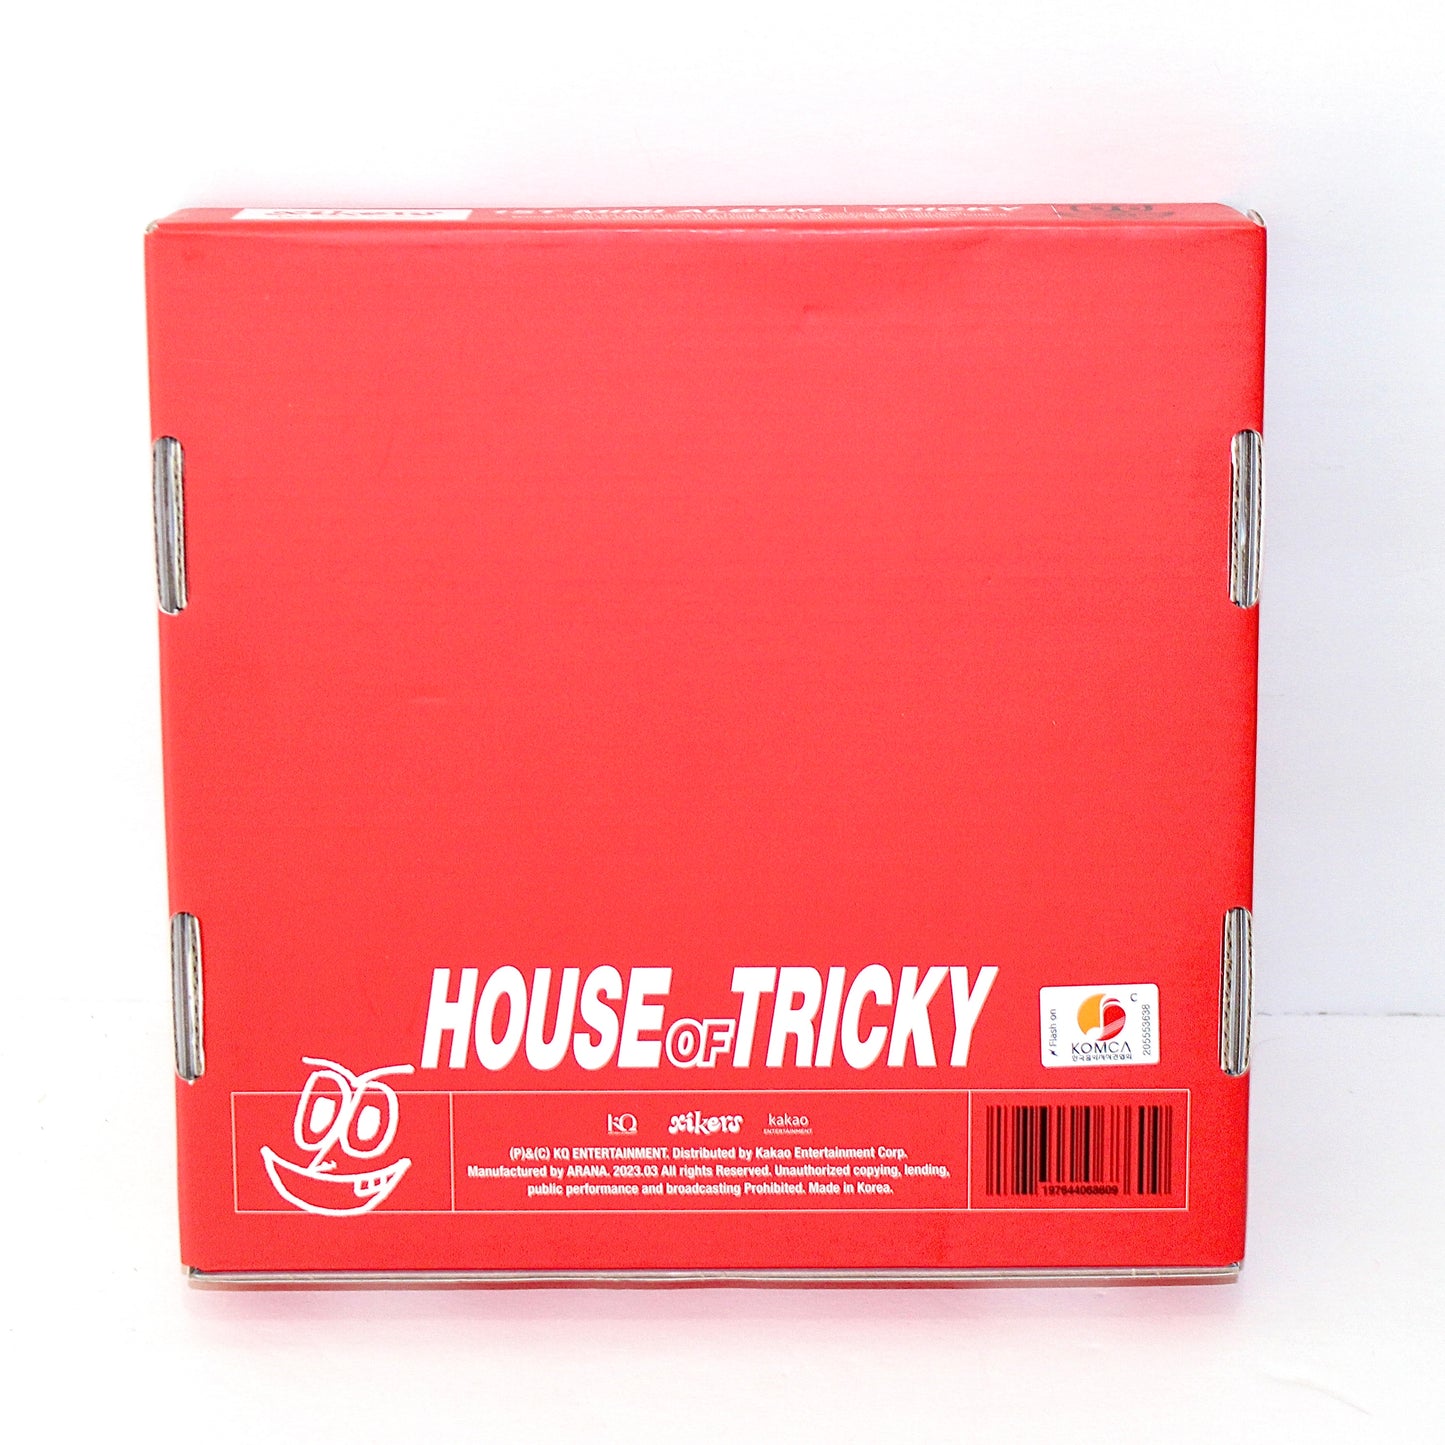 XIKERS 1st Mini Album - House of Tricky: Doorbell Ringing | Tricky Ver.